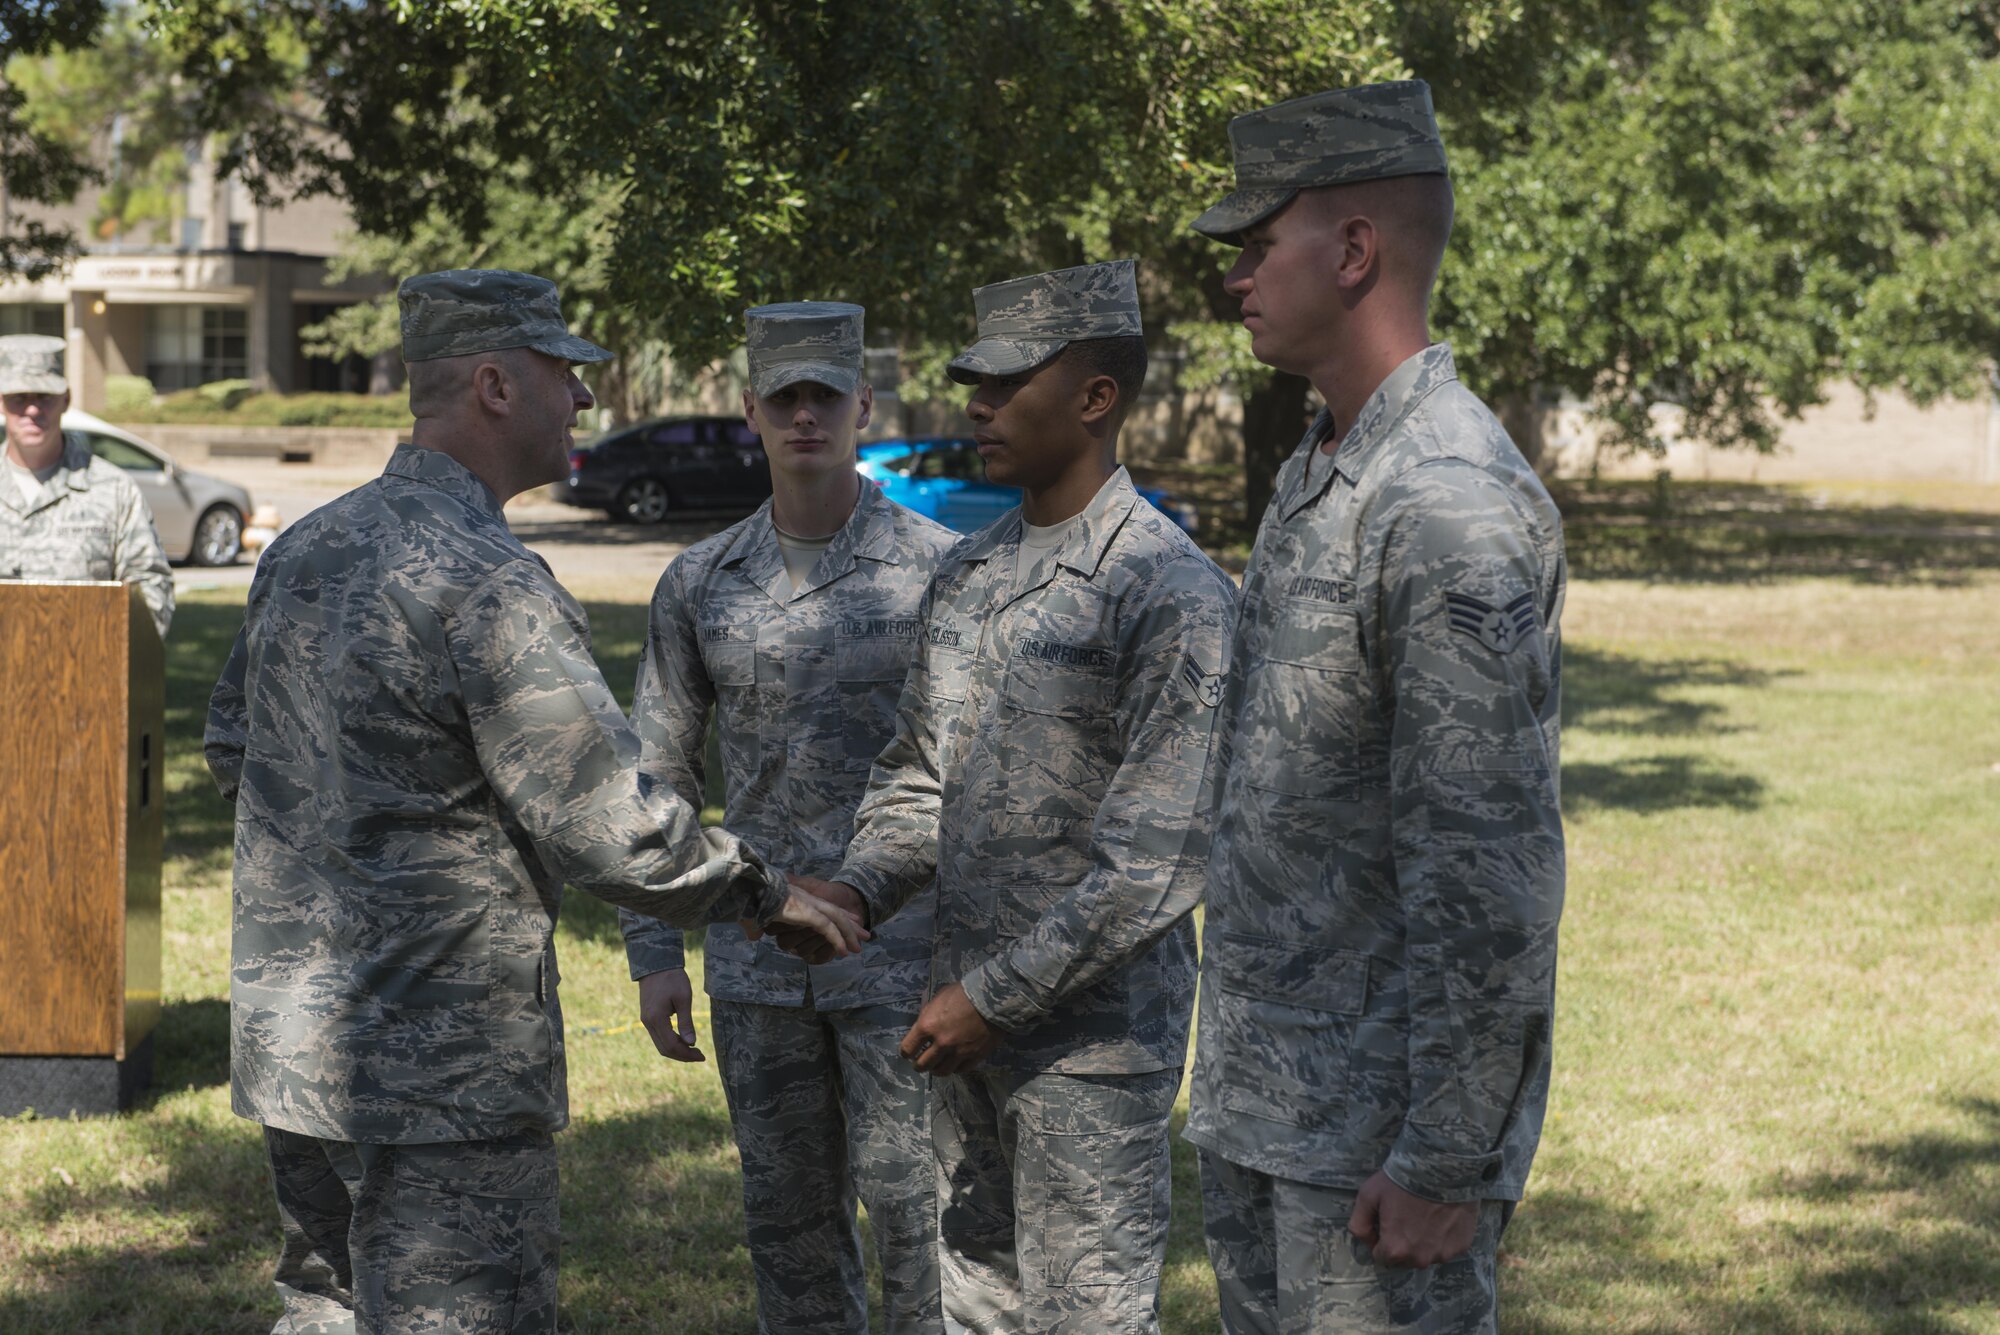 Col. Danny Davis, 81st Mission Support Group commander, presents Airman 1st Class Anthony Glisson, Air Force Honor Guard Mobile Training Team pallbearer instructor, with a unit coin after a mock active duty funeral and graduation ceremony Oct. 12, 2016, on Keesler Air Force Base, Miss. Keesler Honor Guard members were trained on the proper wear of the ceremonial uniform, firing party, presentation of the colors and pallbearer duties during an eight day course with the Air Force Honor Guard Mobile Training Team. The team ended the training with the mock funeral and graduation ceremony. (U.S. Air Force photo by Andre’ Askew/Released)